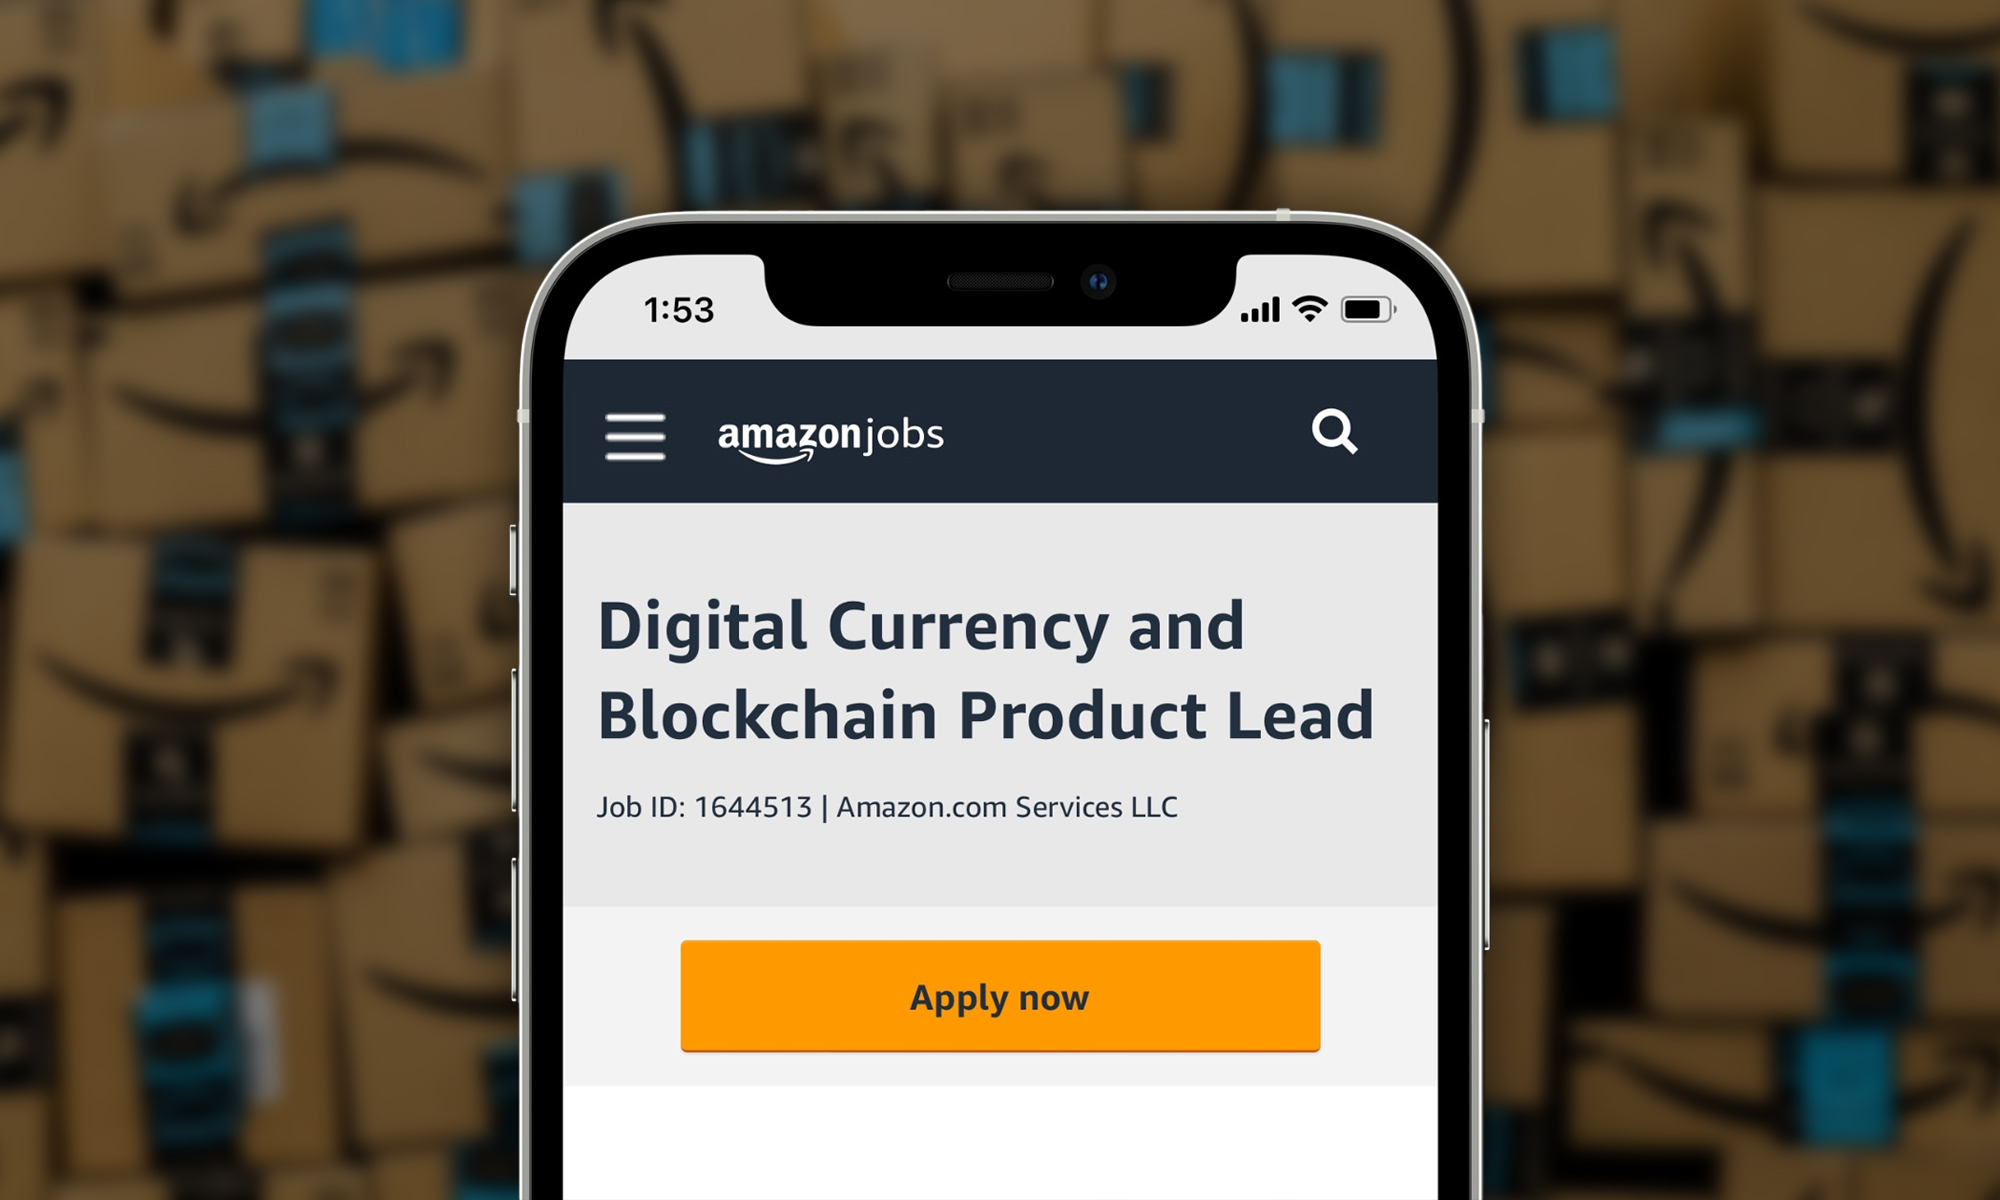 amazon is looking for a digital currency and blockchain expert